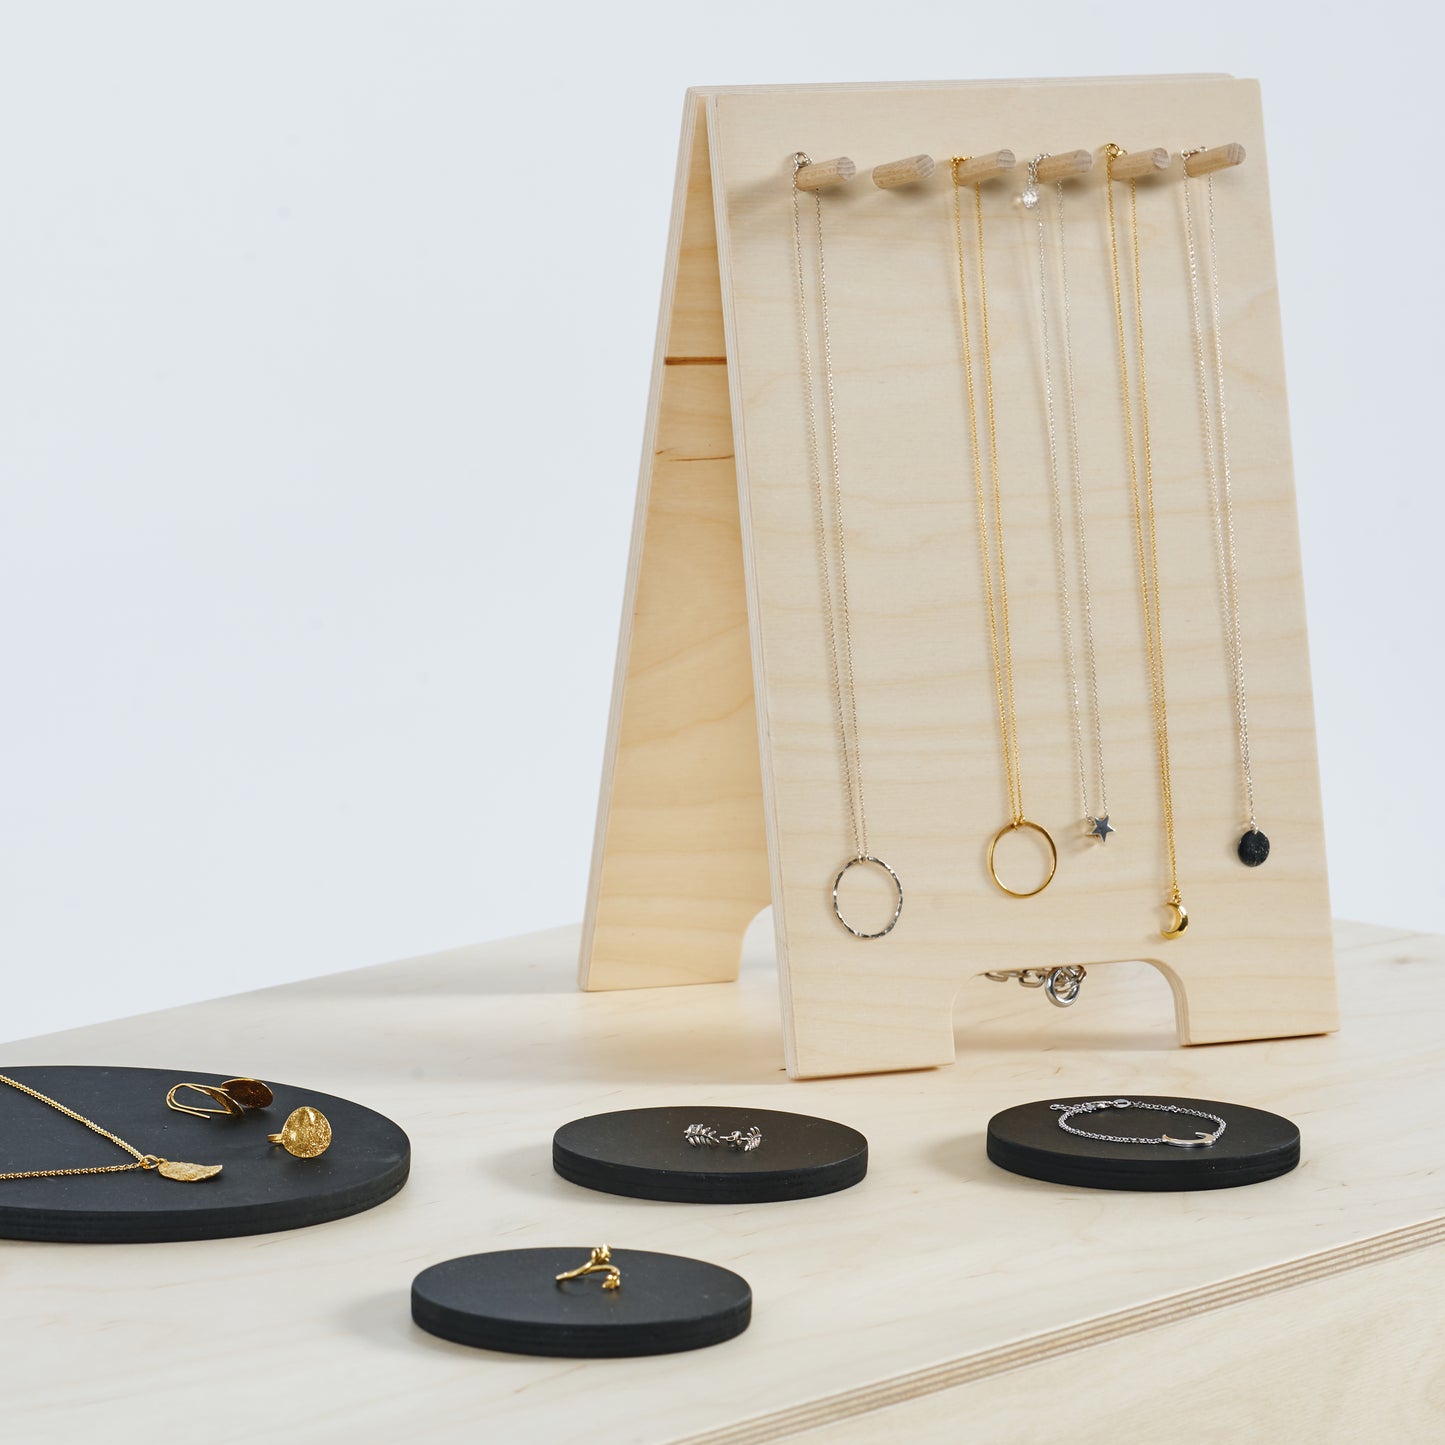 Necklace stand | wooden shop and craft fair display